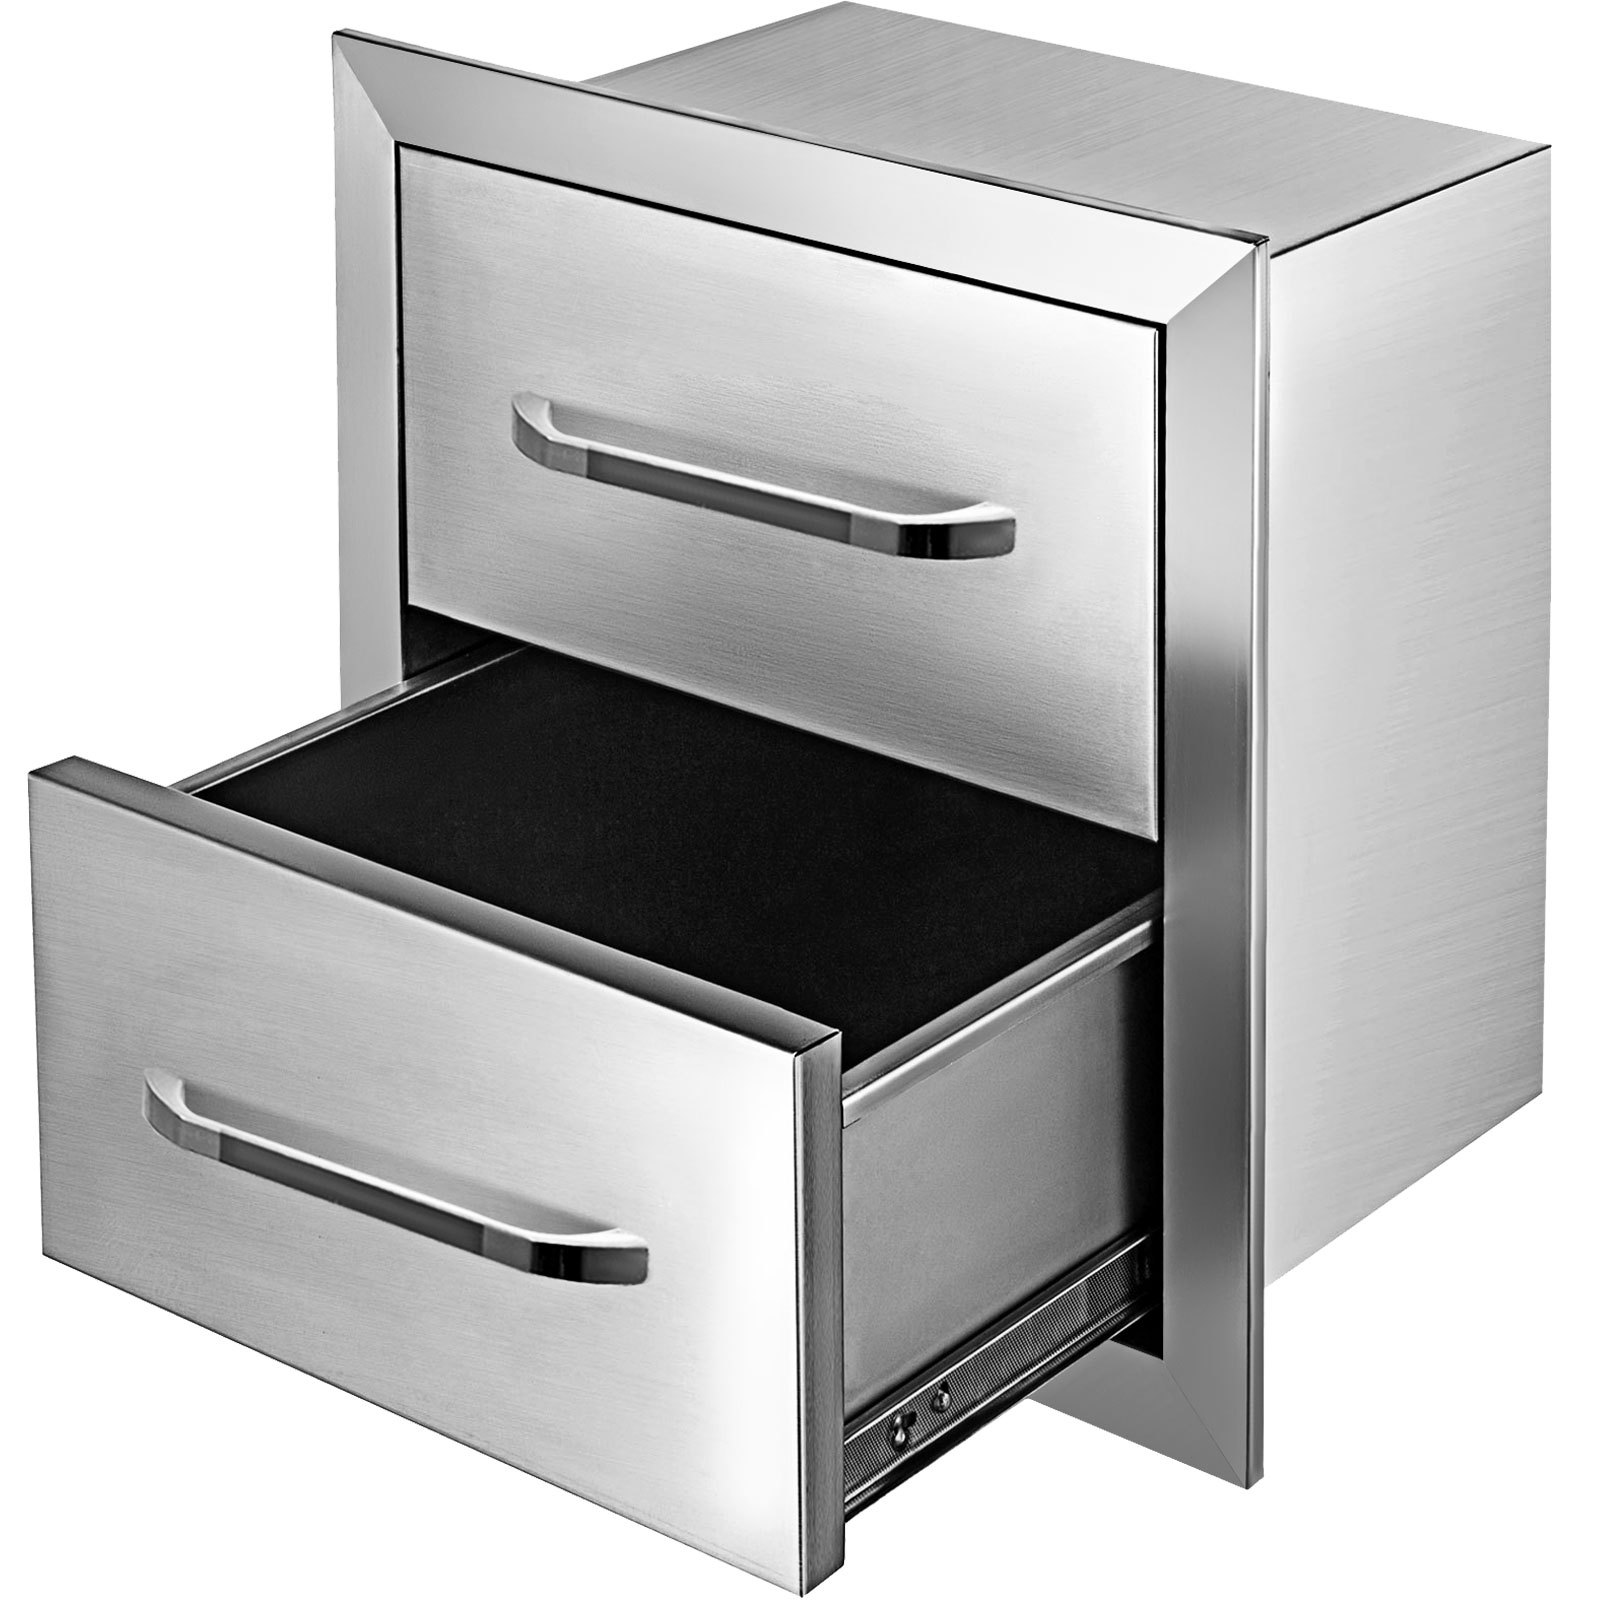 Outdoor Kitchen Bbq Island Stainless Steel Double Access Drawer Storage W/handle от Vevor Many GEOs